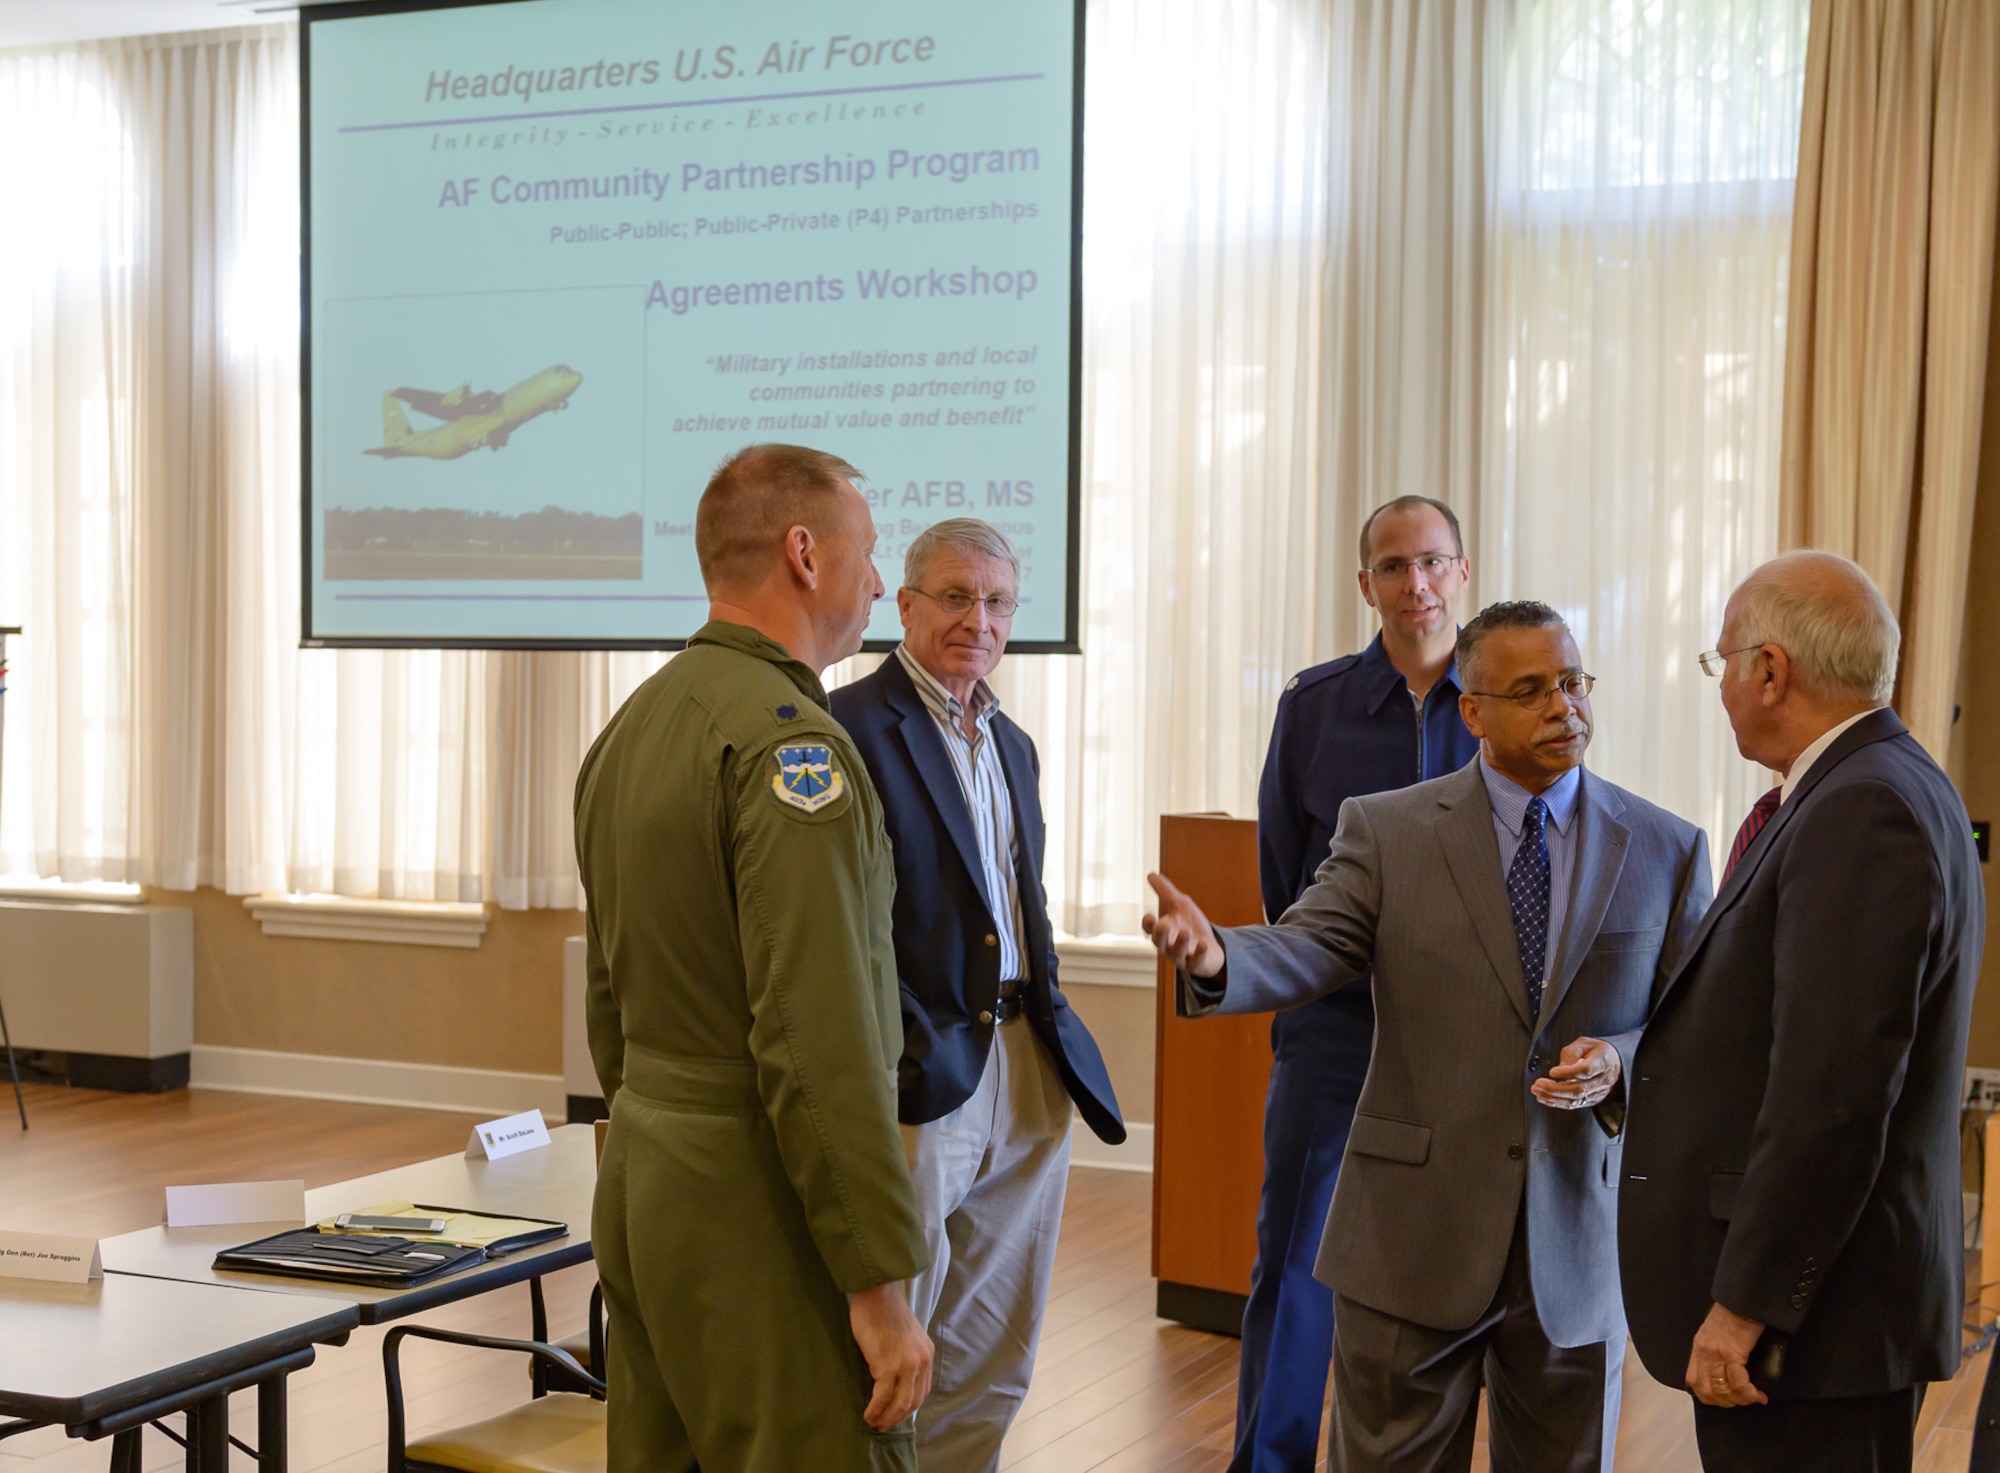 Dr. Wayne Clark, 81st Mission Support Group deputy director, introduces attendees to U.S. Army retired Col. Fred Meurer (right) during the Air Force Community Partnership Program Agreements Workshop at the Gulf Park Campus of The University of Southern Mississippi Oct. 25, 2017, Long Beach, Mississippi. The program is part of a larger Air Force Public-Public, Public-Private (P4) initiative to encourage installations and local communities to combine or improve resources or operating processes. Mississippi representatives from state and local communities and various civic leaders attended the event. (U.S. Air Force photo by Andre’ Askew)